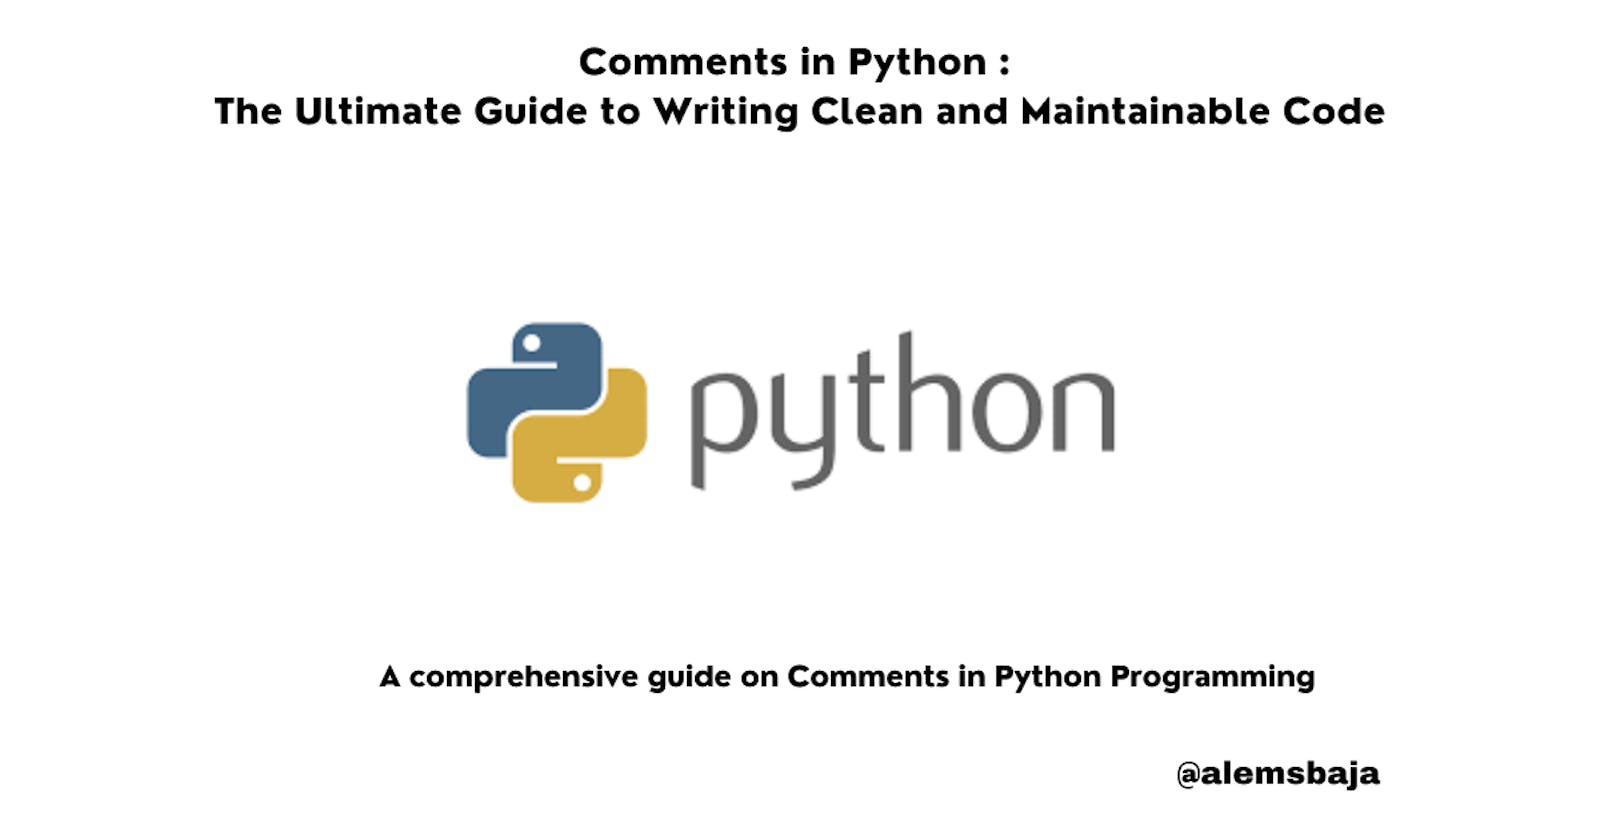 Comments in Python : The Ultimate Guide to Writing Clean and Maintainable Code